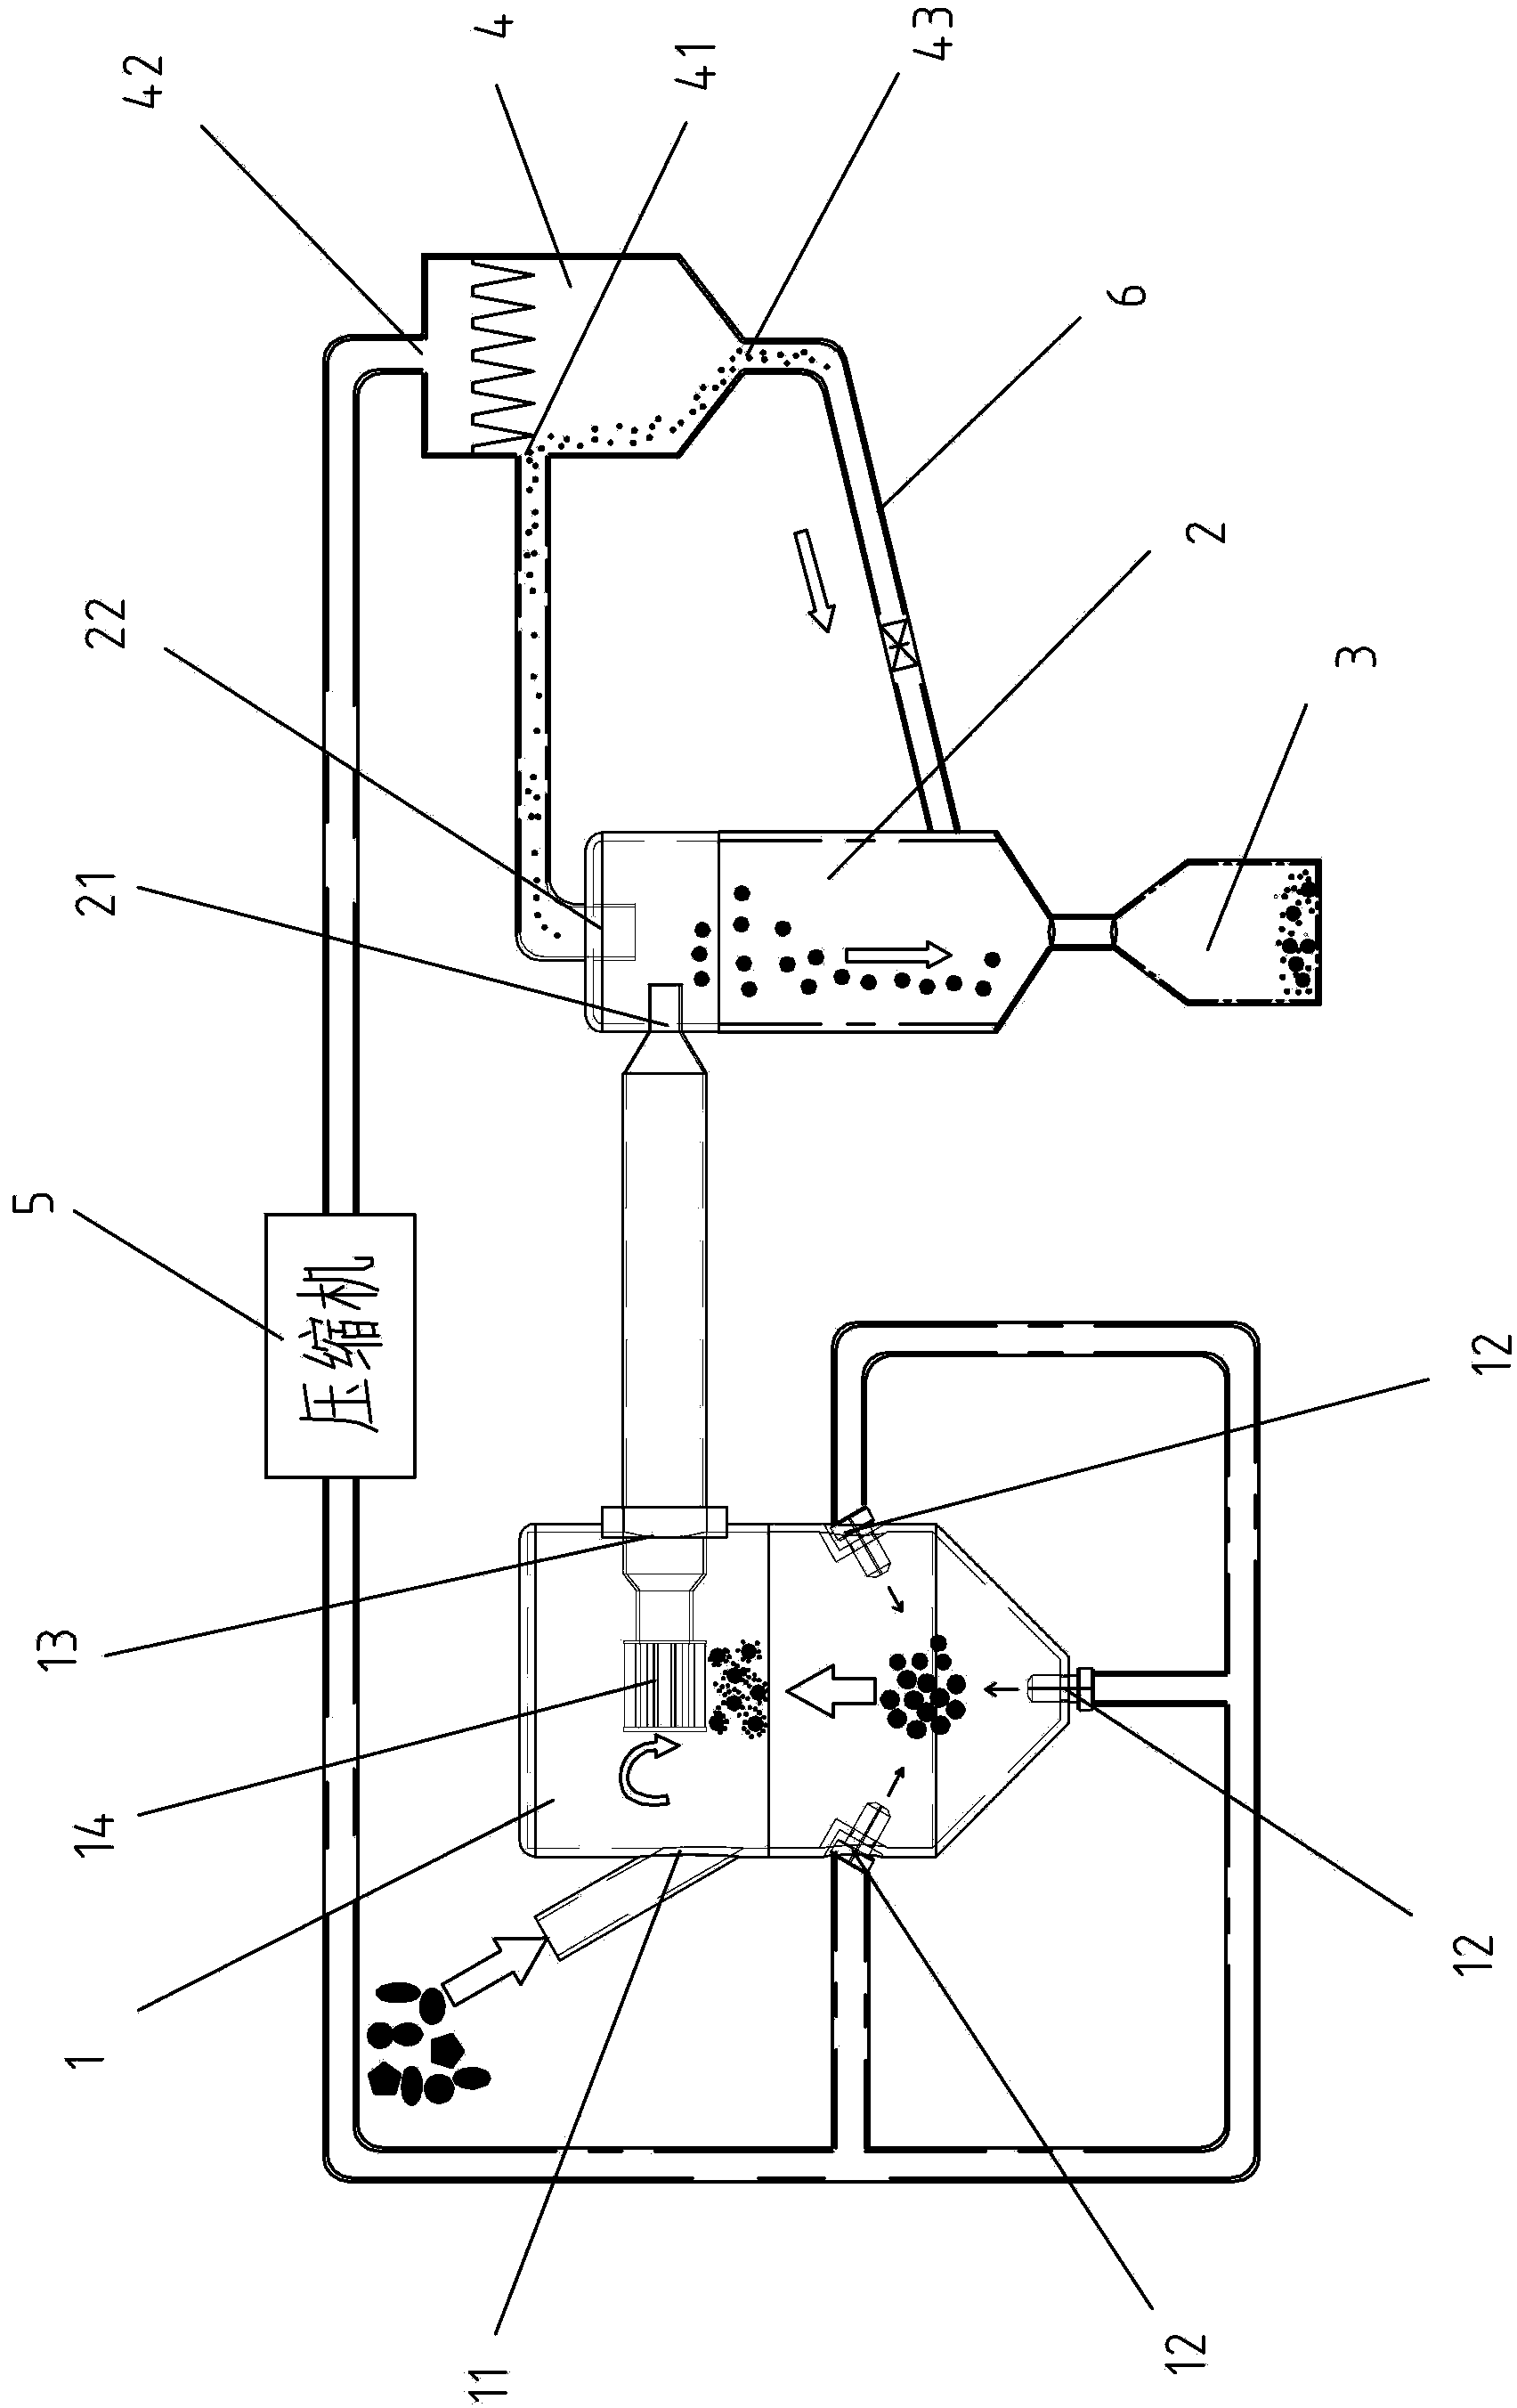 Sintered Nd-Fe-B magnet manufacturing method and device